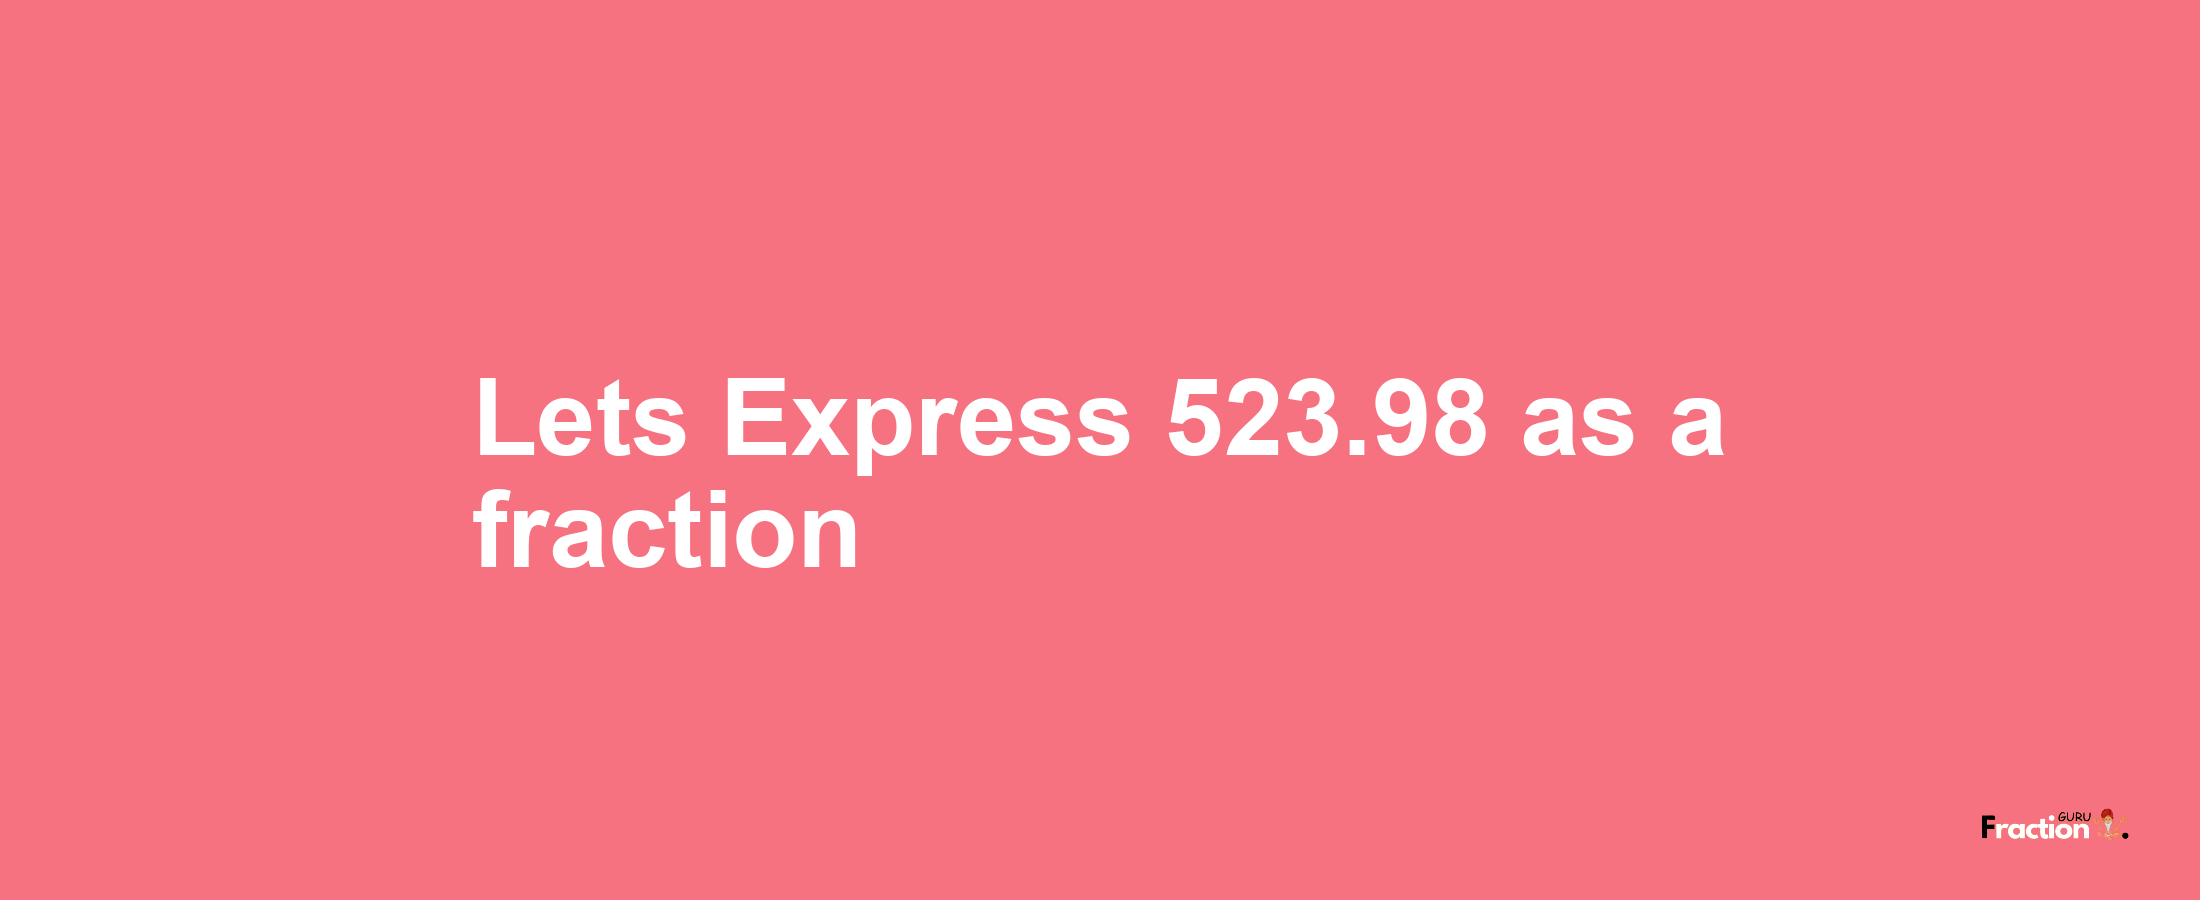 Lets Express 523.98 as afraction